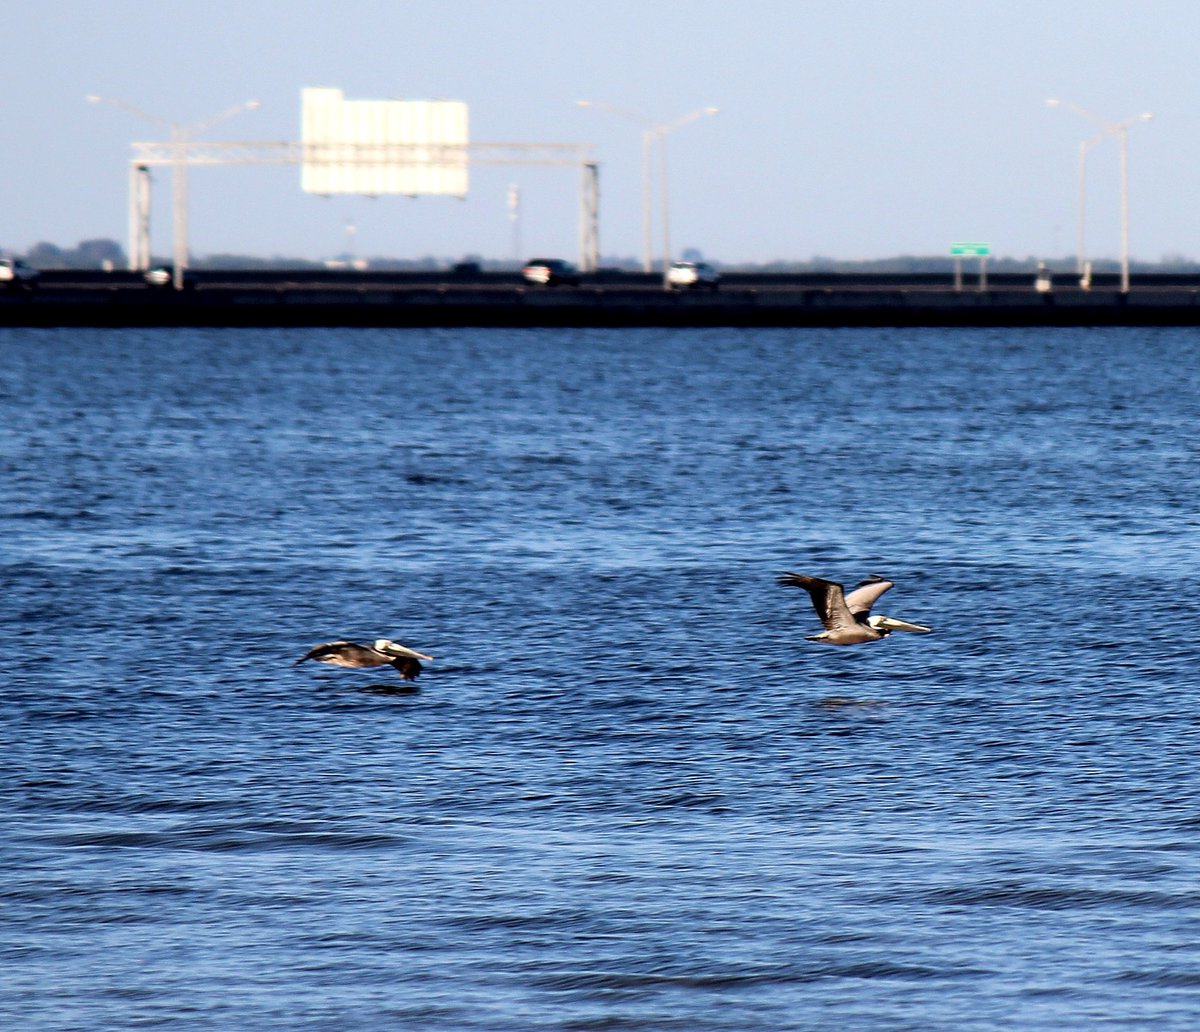 #brownpelicans #scenicsunday #photography #cypresspointpark @CityofTampa